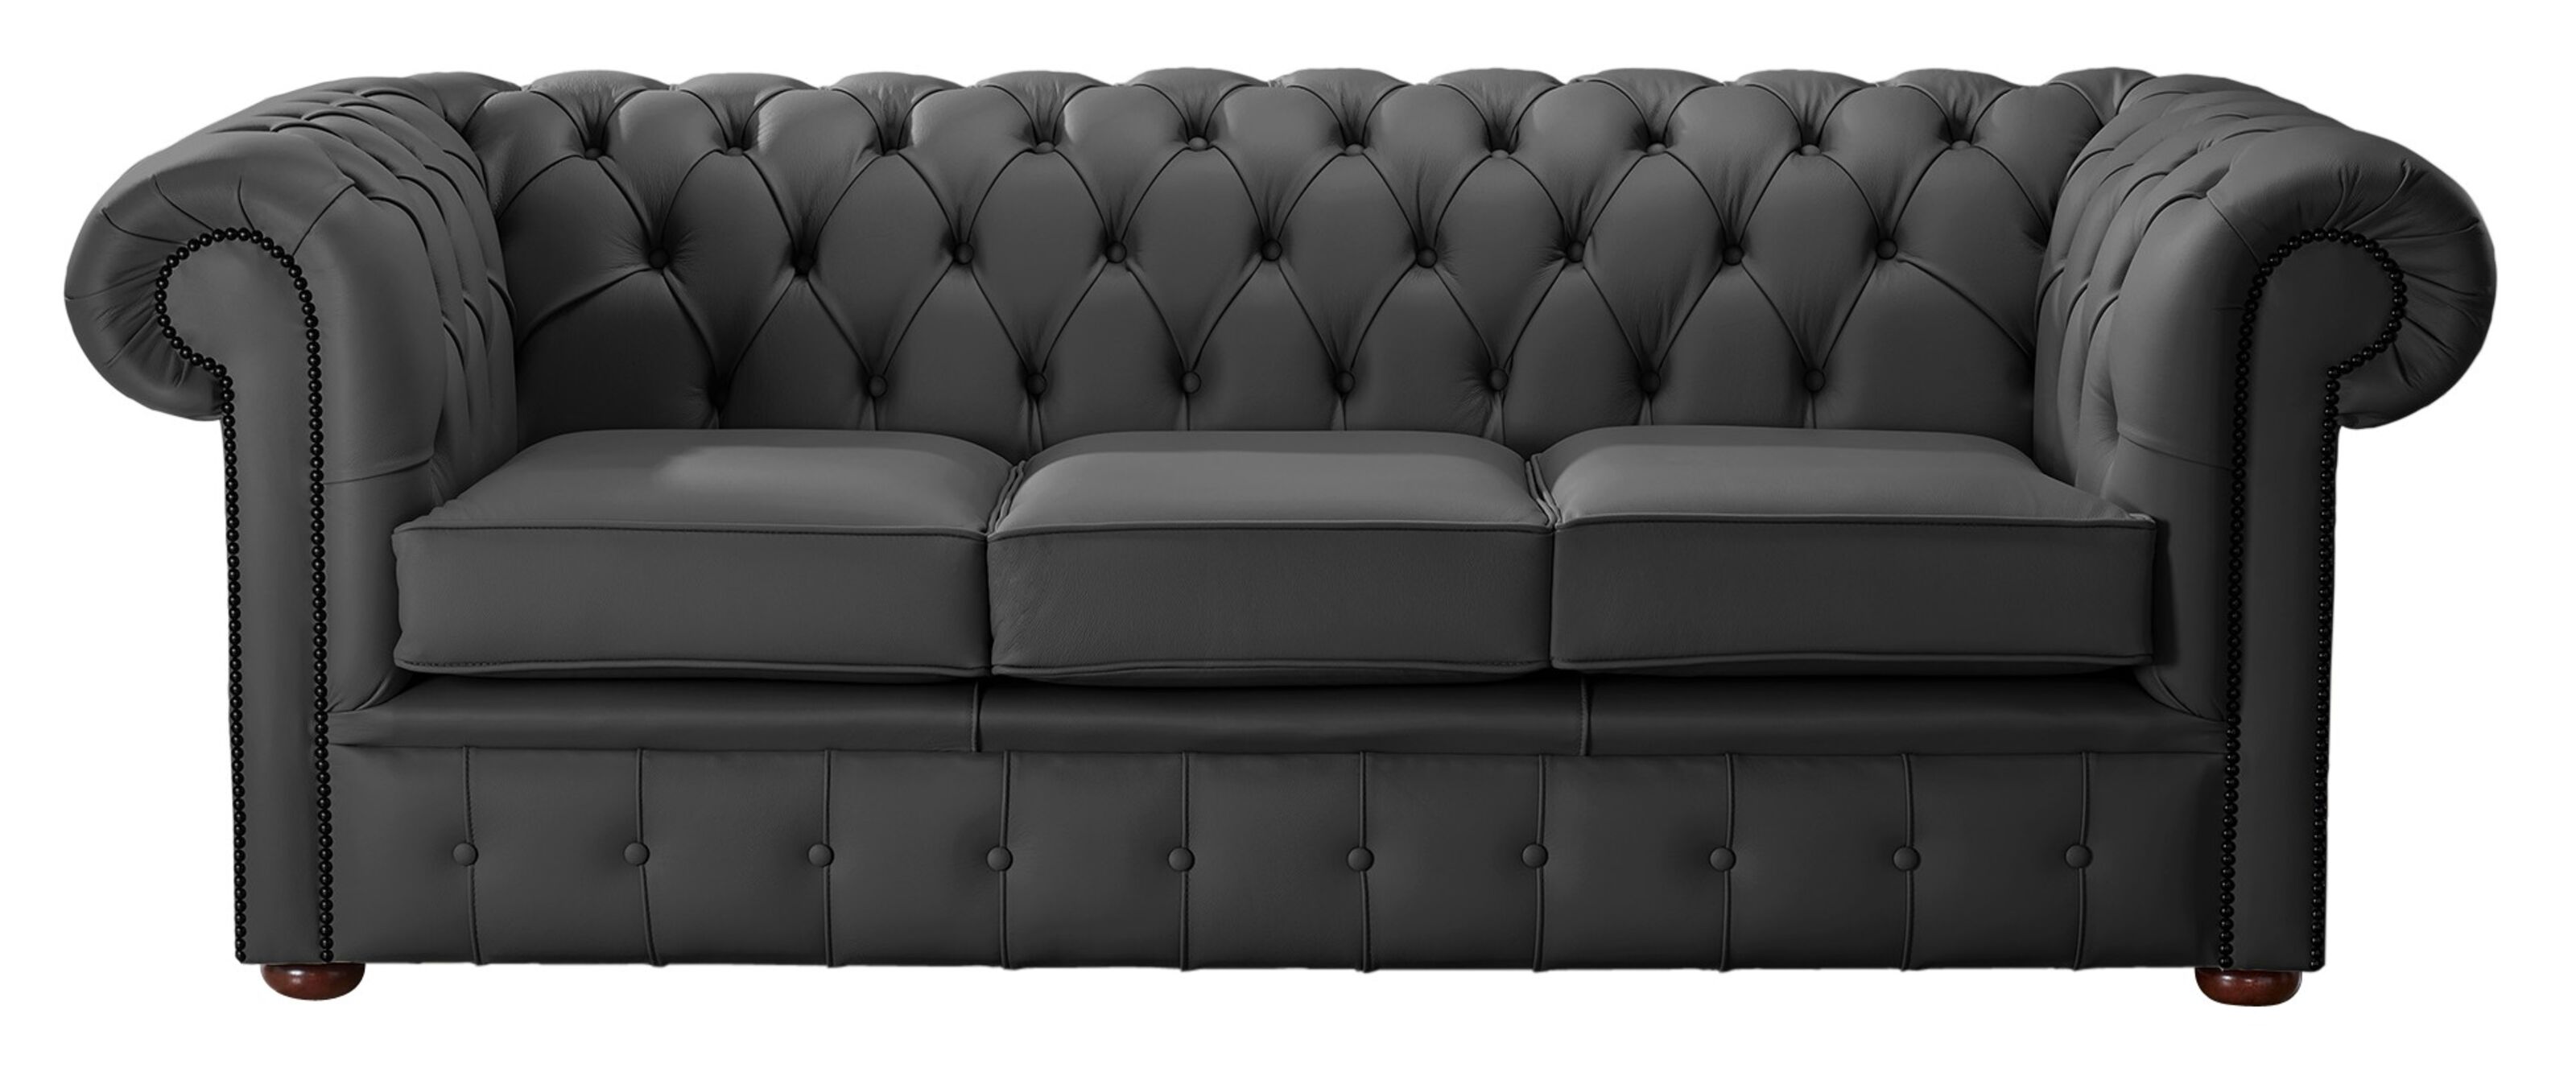 Classic Elegance in Pakistan The Chesterfield Sofa  %Post Title